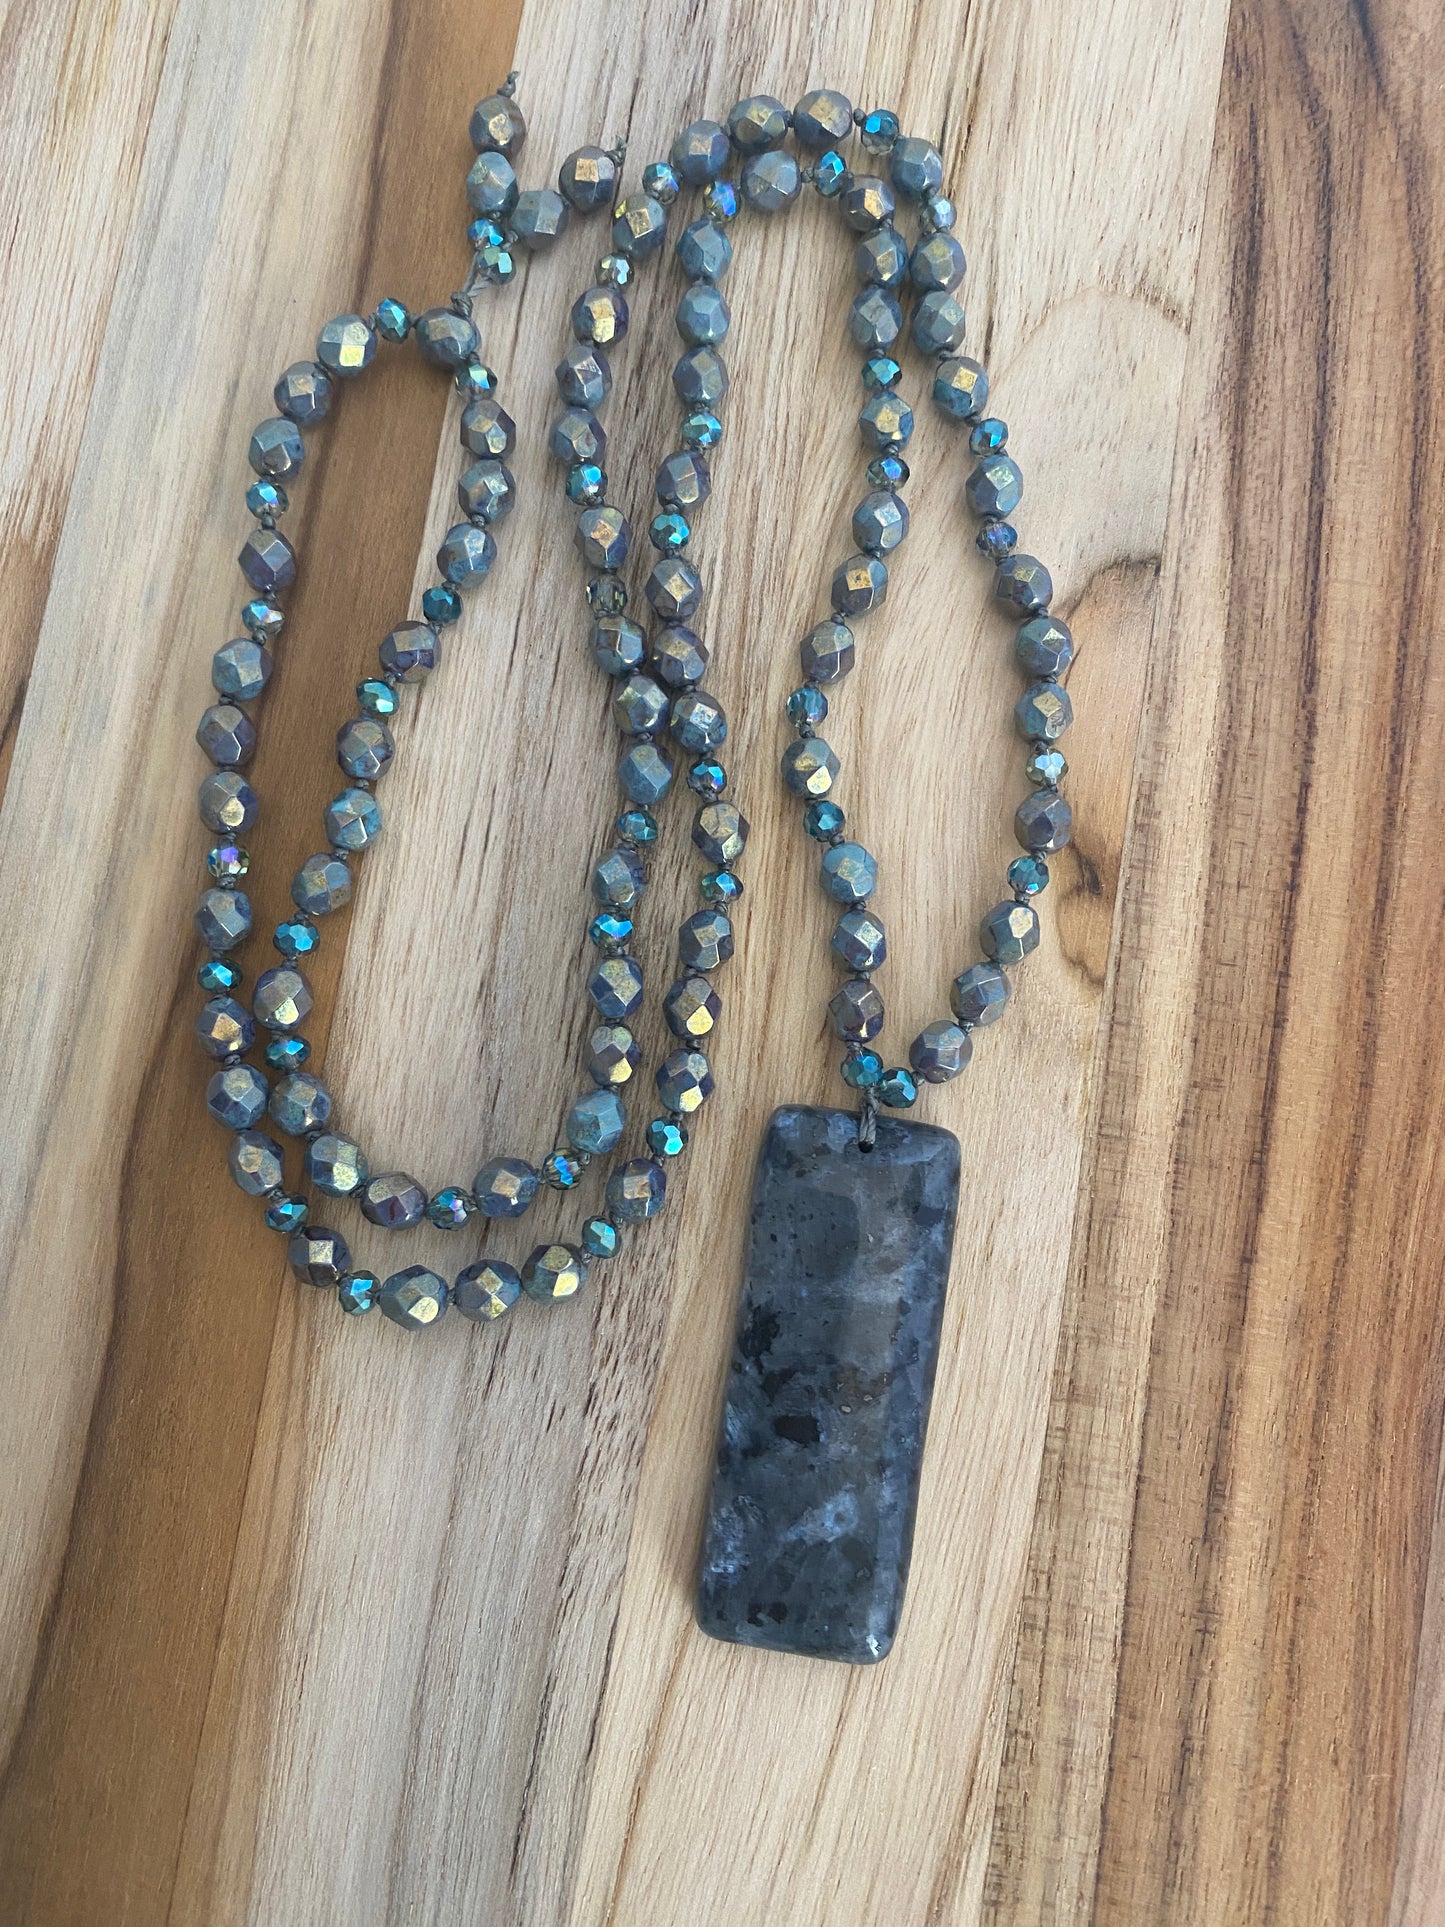 28" Long Hand Knotted Larvikite Pendant Necklace with Czech Glass Beads & Crystals